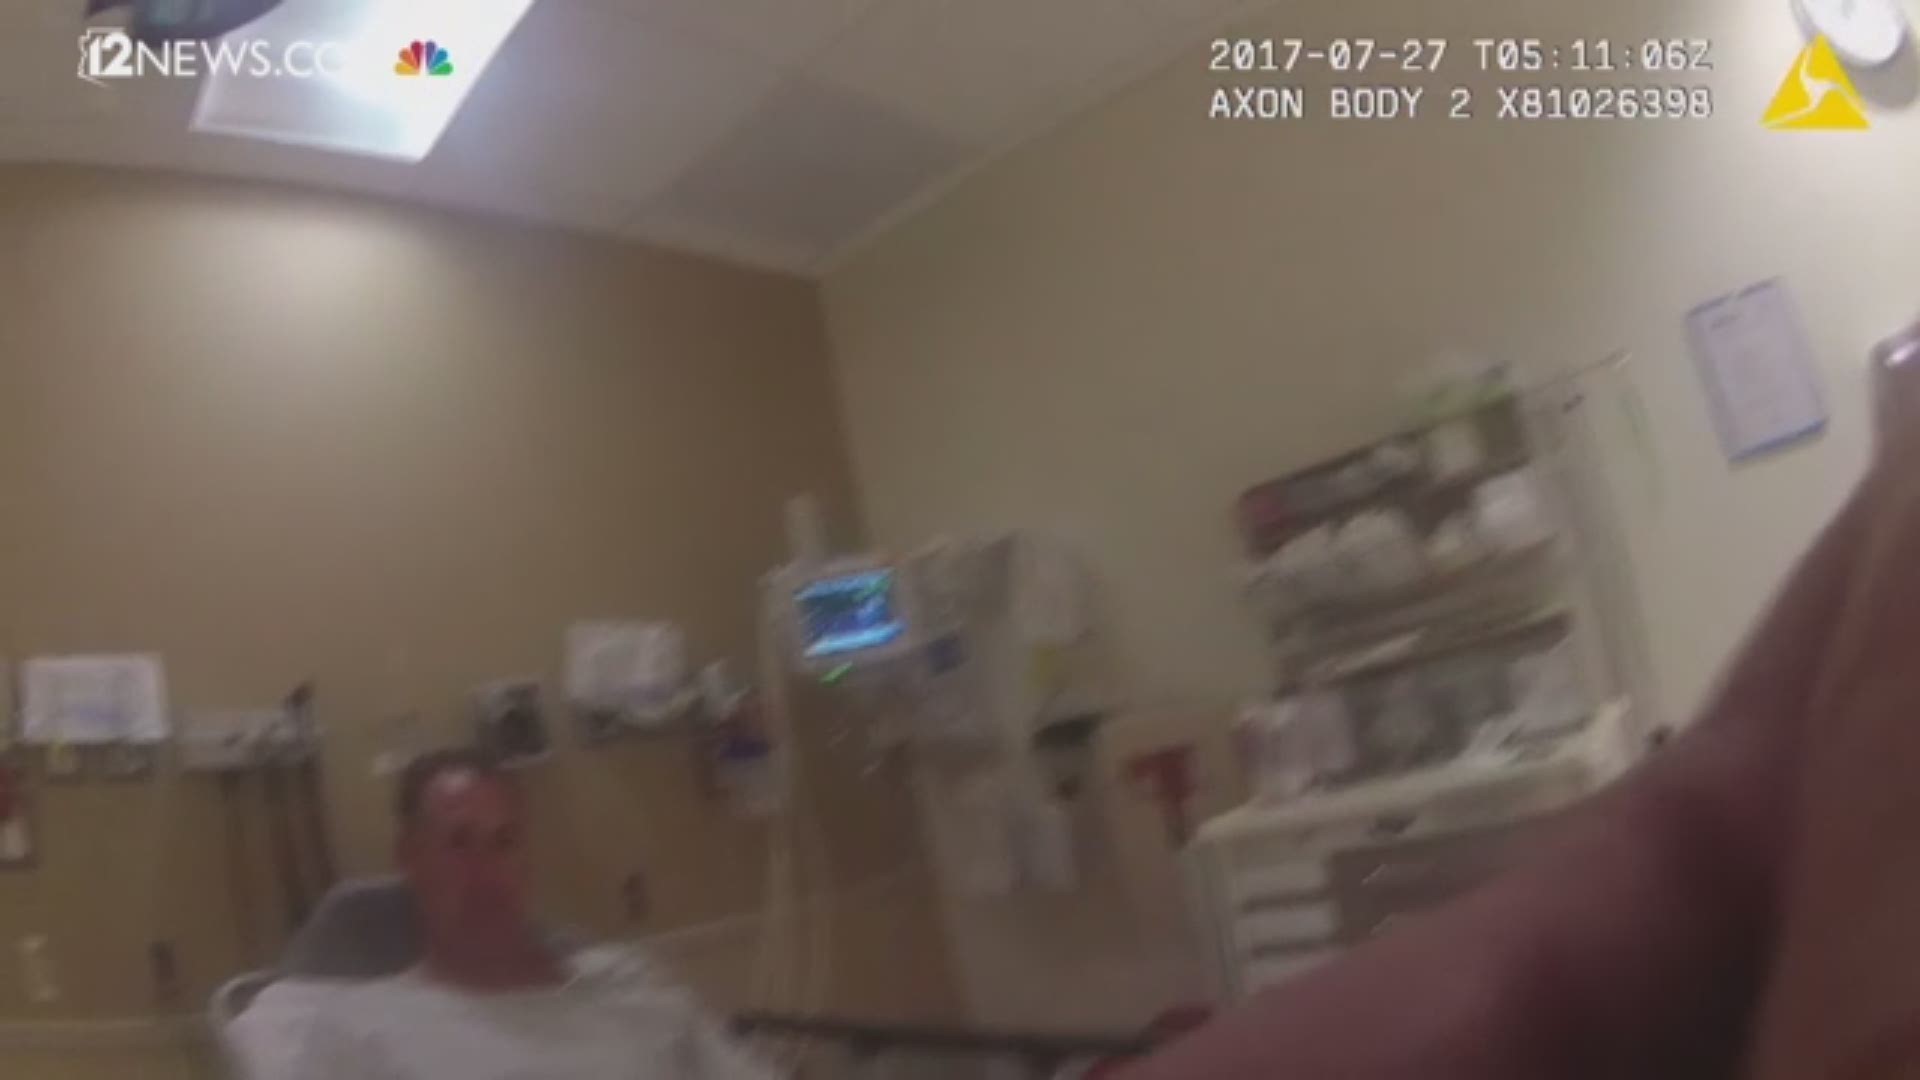 Johnny Wheatcroft is suing Glendale Police for a 2017 incident that involved officers tasing Wheatcroft 11 times, his attorneys say. During the incident Officer Mark Lindsey was struck in the head with a bag of sodas. Body cam video provided by Wheatcroft's attorney, Marc Victor, shows Officer Lindsey being interviewed about what happened while in the hospital.